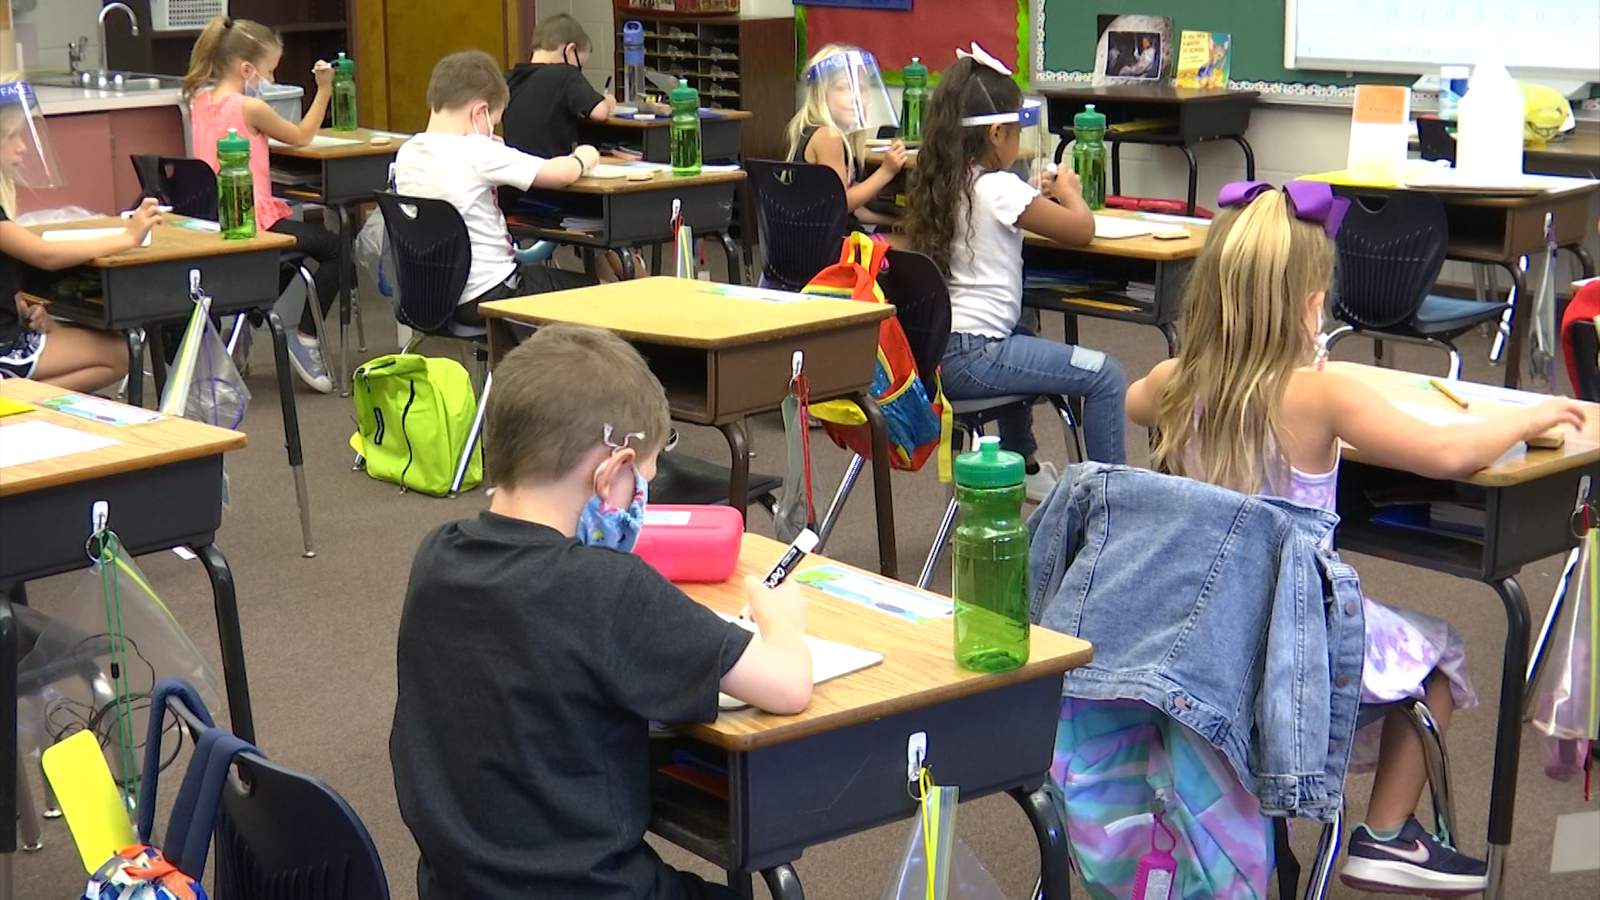 Marion County kindergarten class switches to online learning after COVID-19 exposure